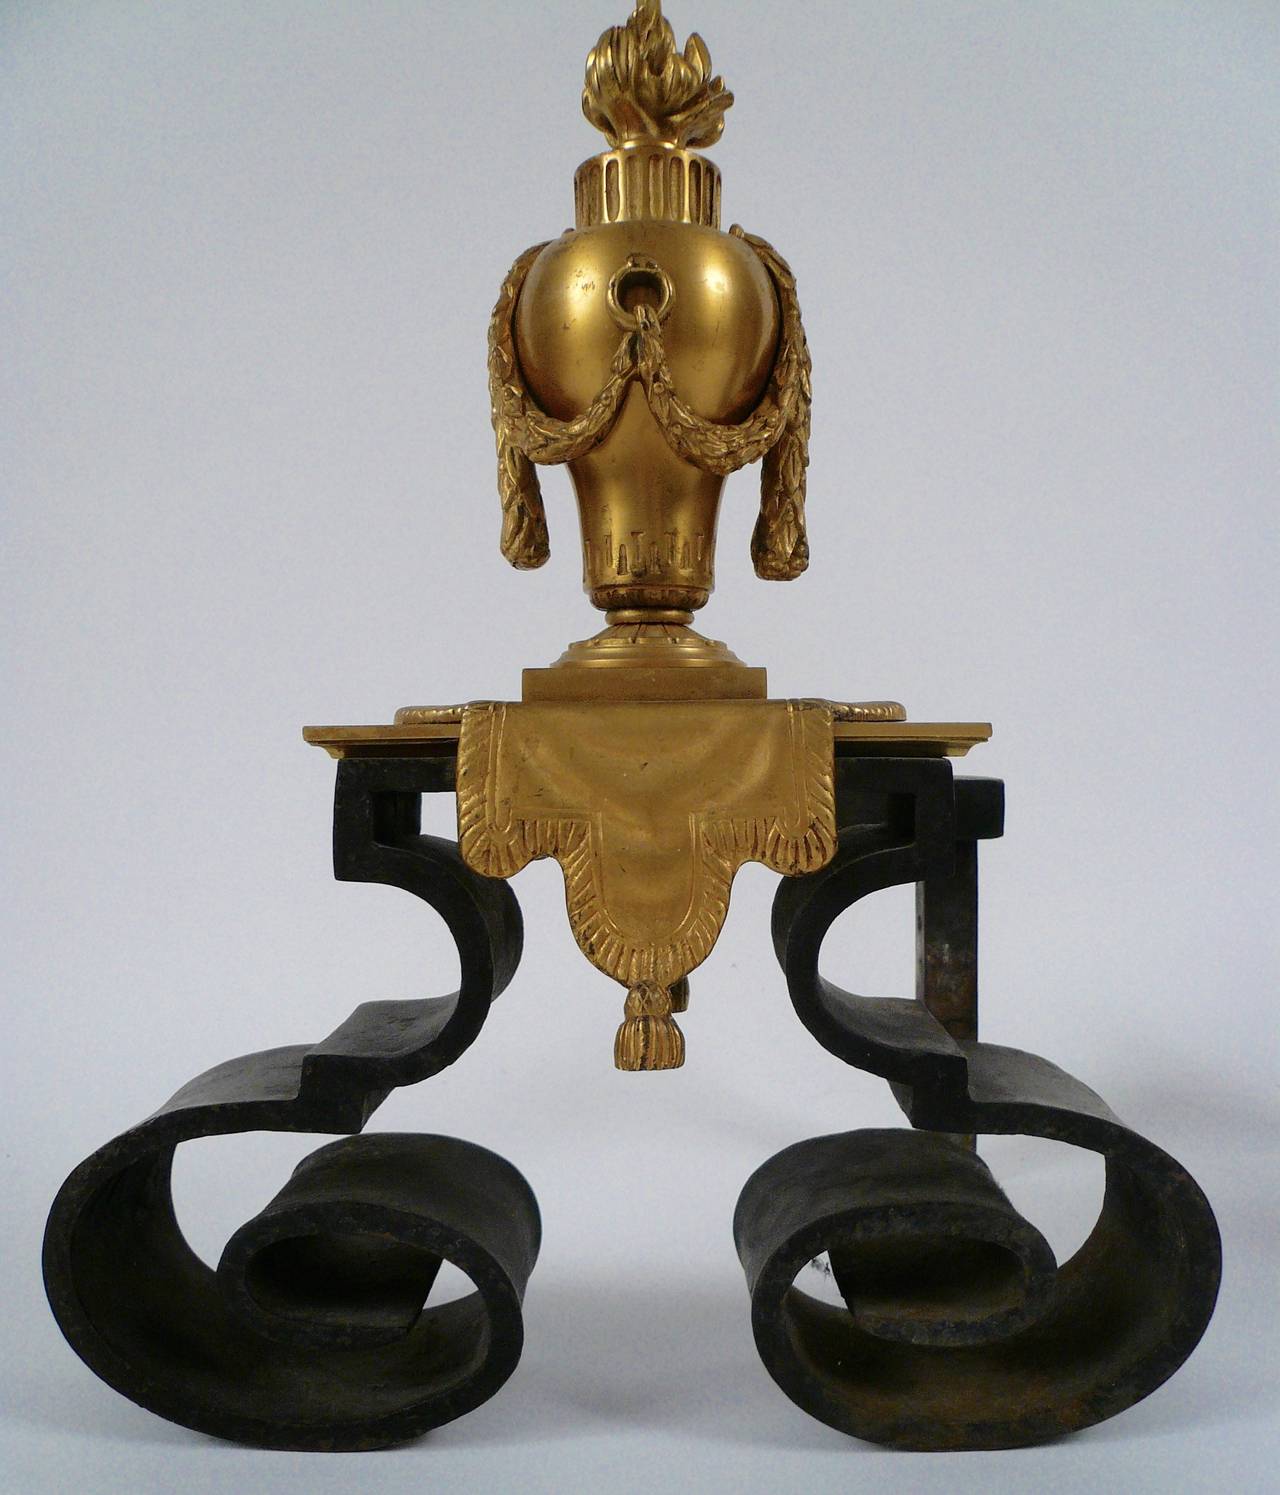 Pair of neoclassical style gilt bronze andirons, of swagged urn form, terminating in flame finials.